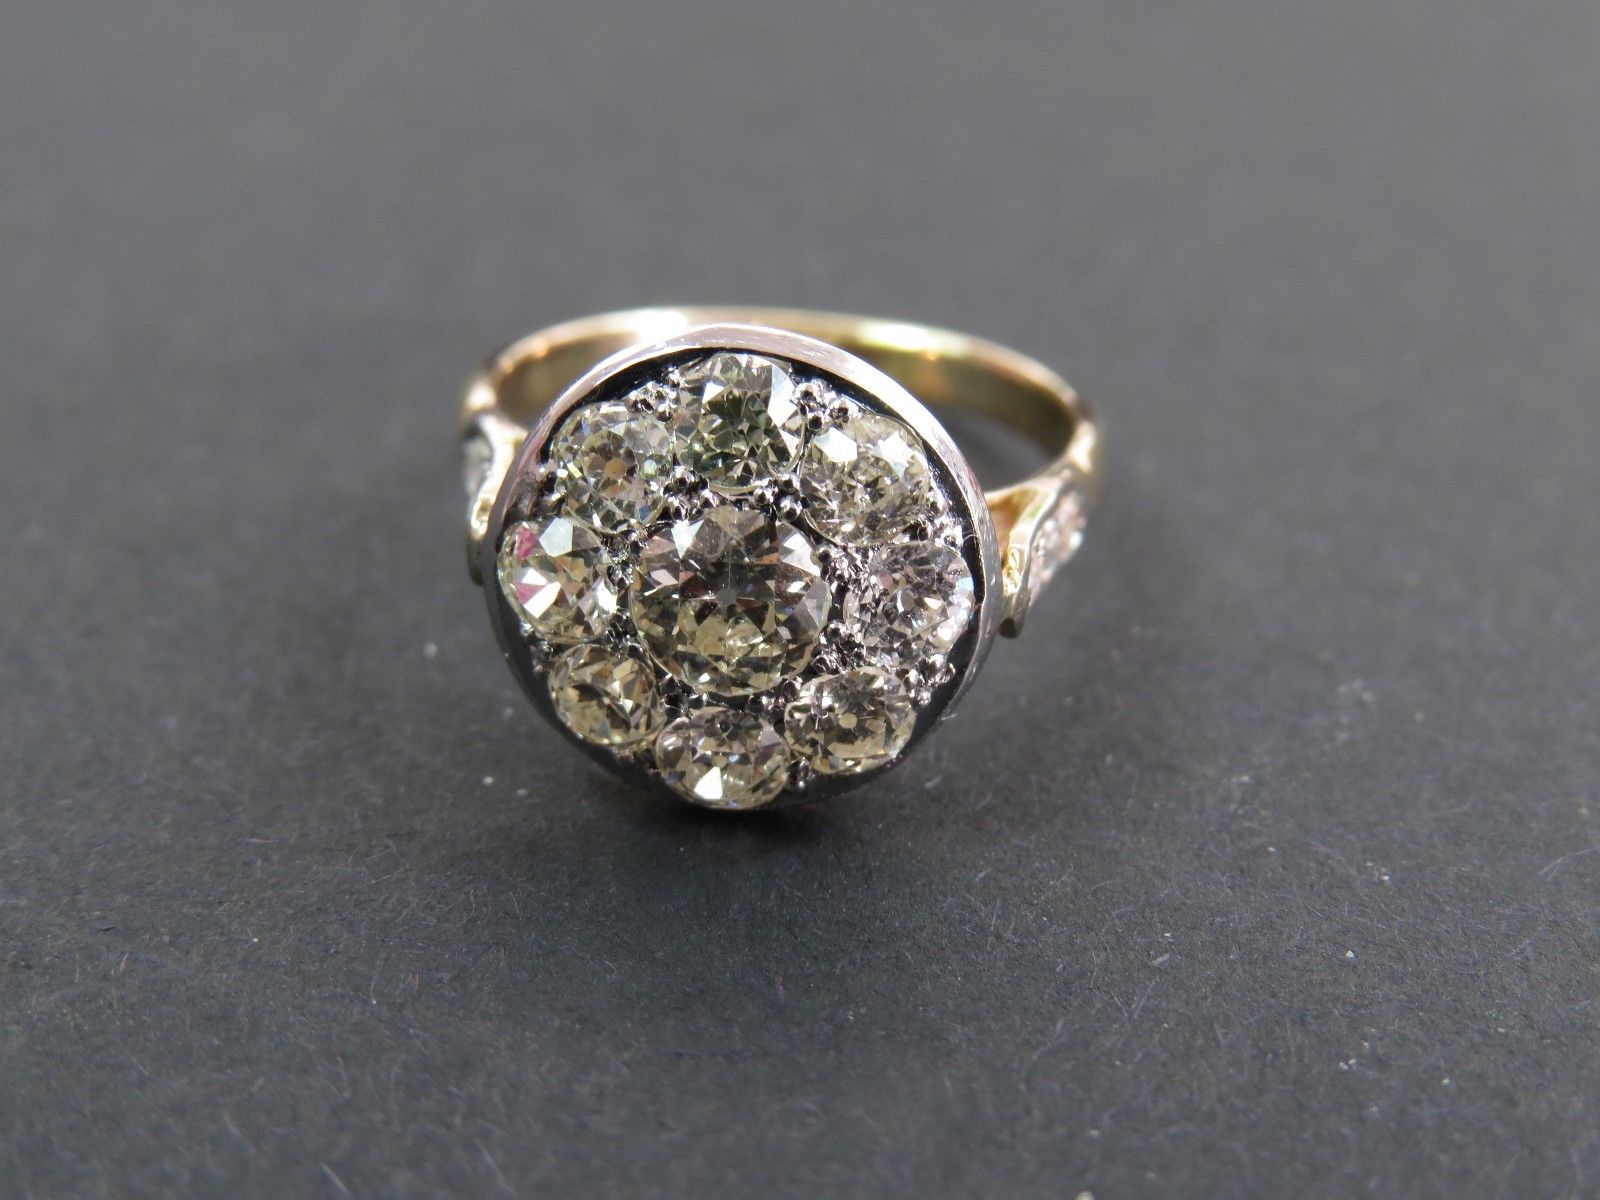 Withdrawn Lot Antique Edwardian 18ct Gold 1.3ct Diamond Cluster Ring C.1910 - Image 6 of 7